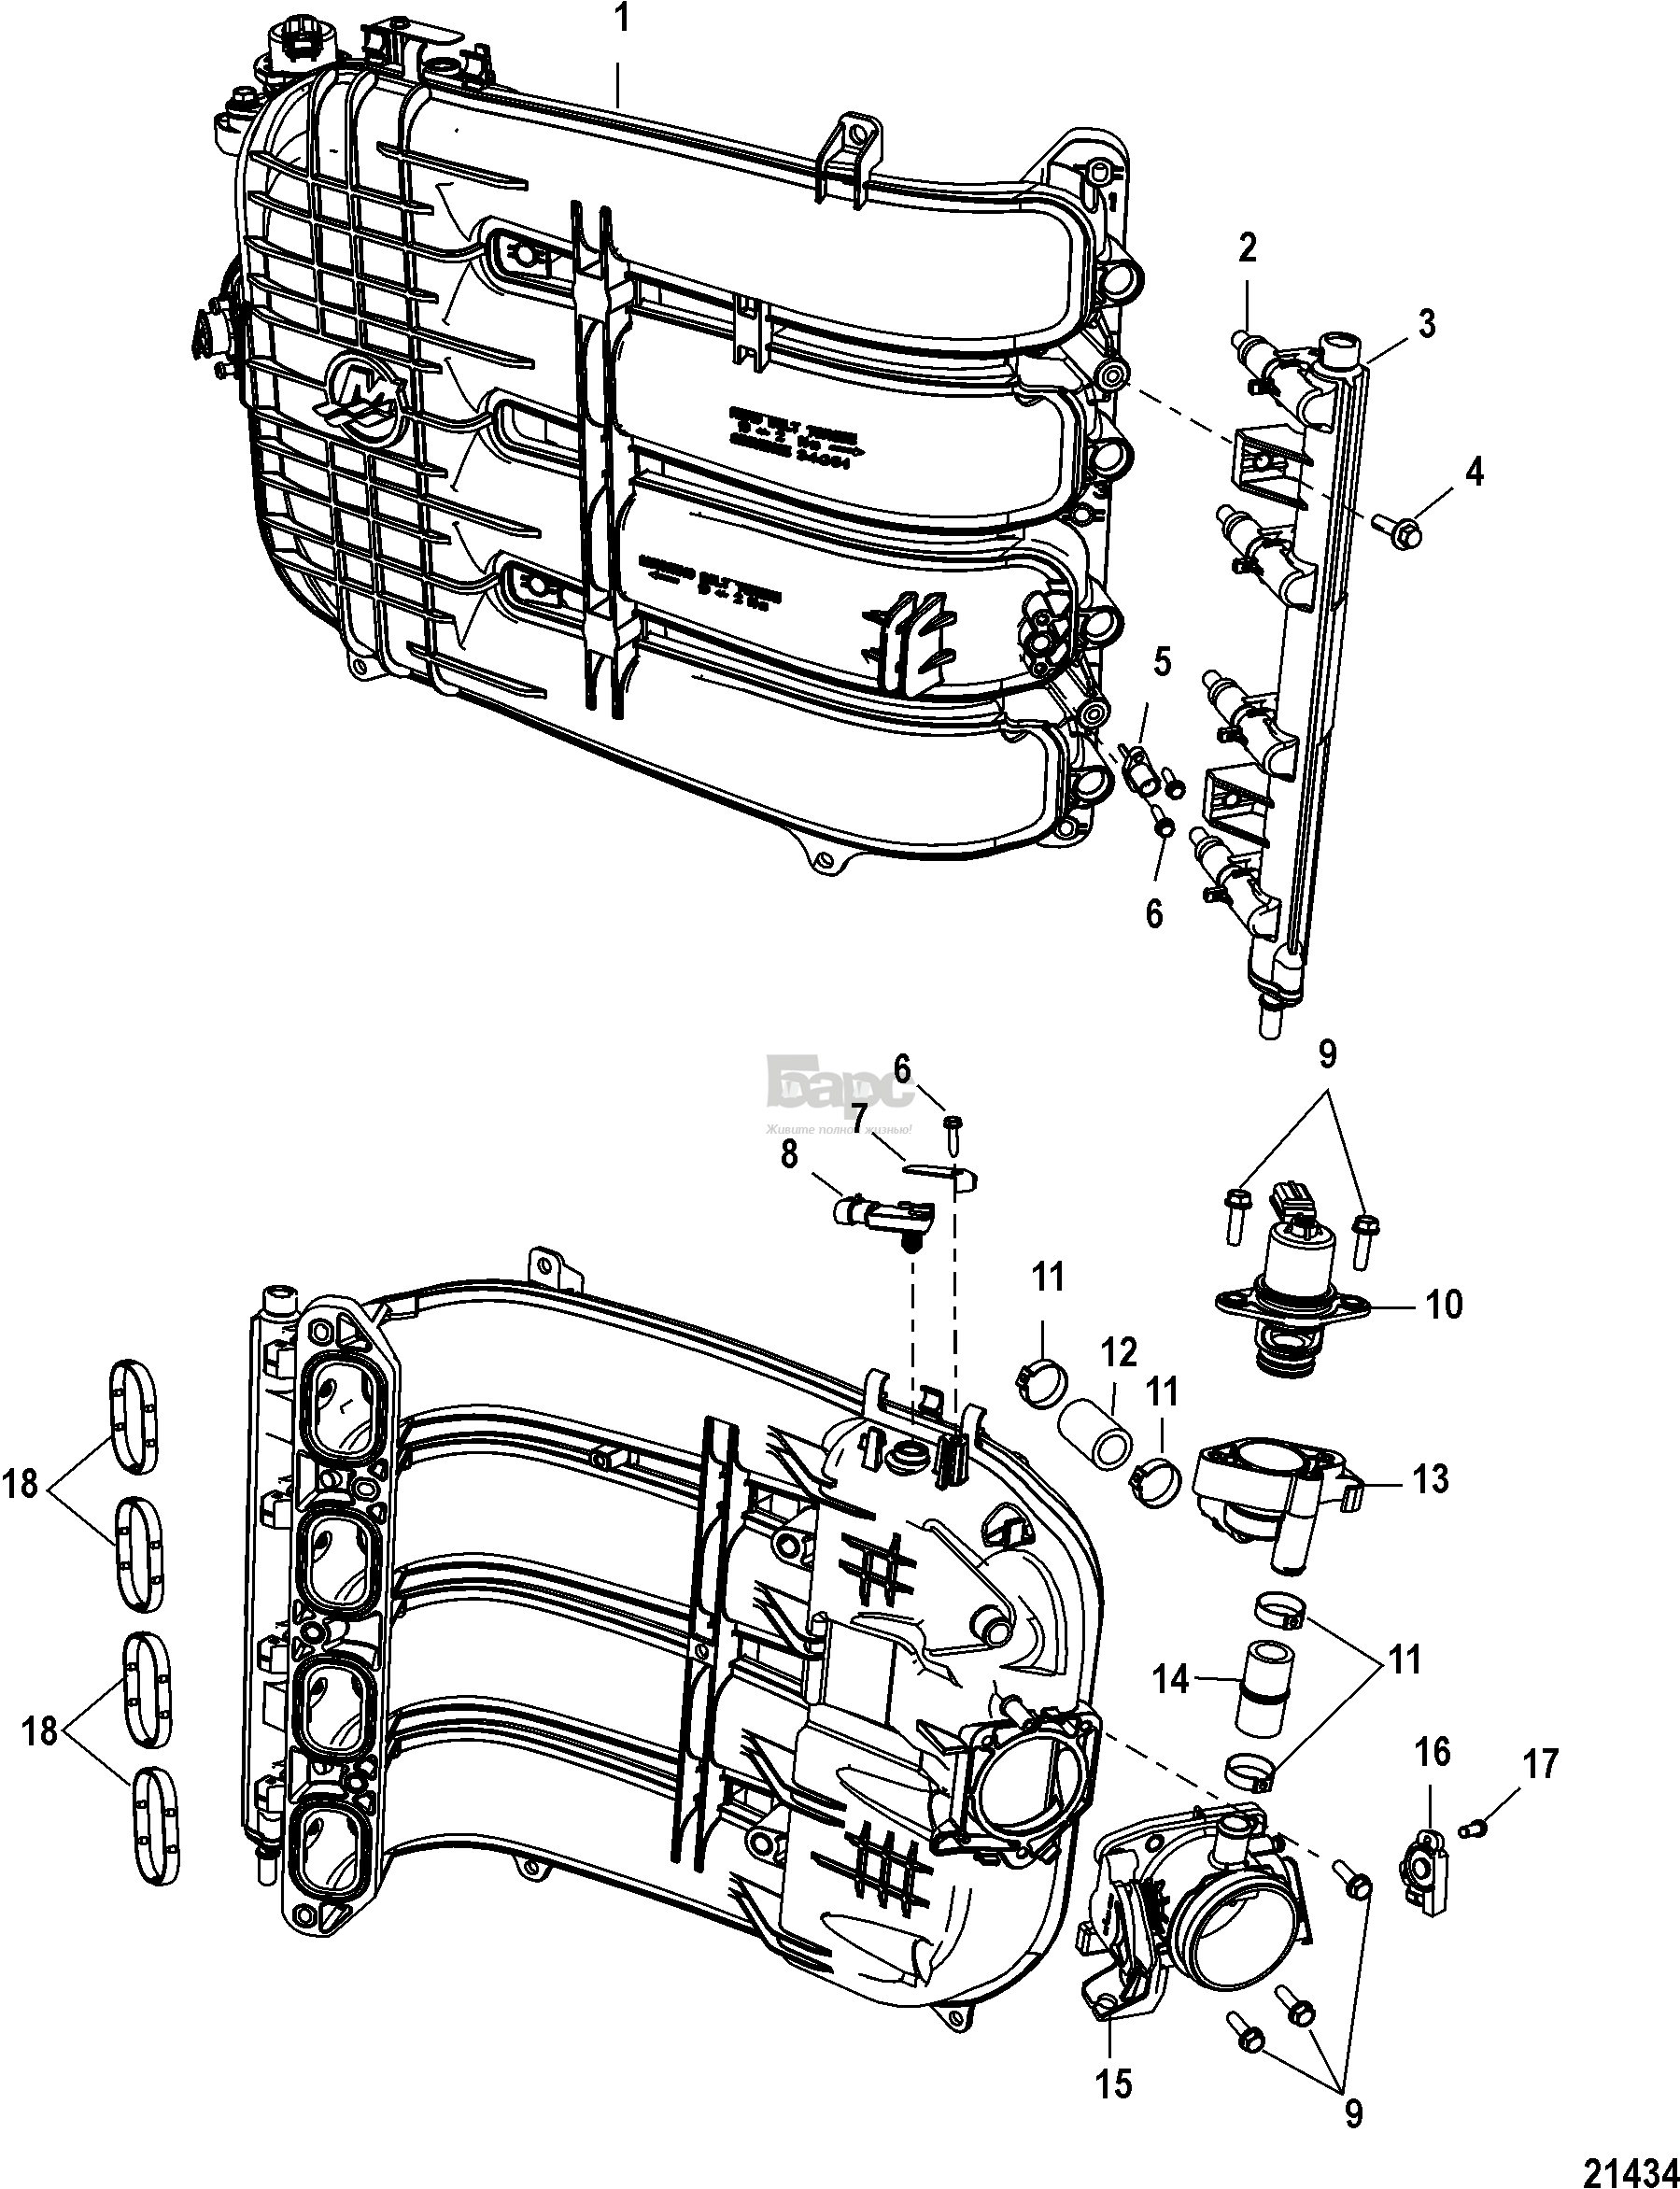 Intergrated Air Fuel Module Components